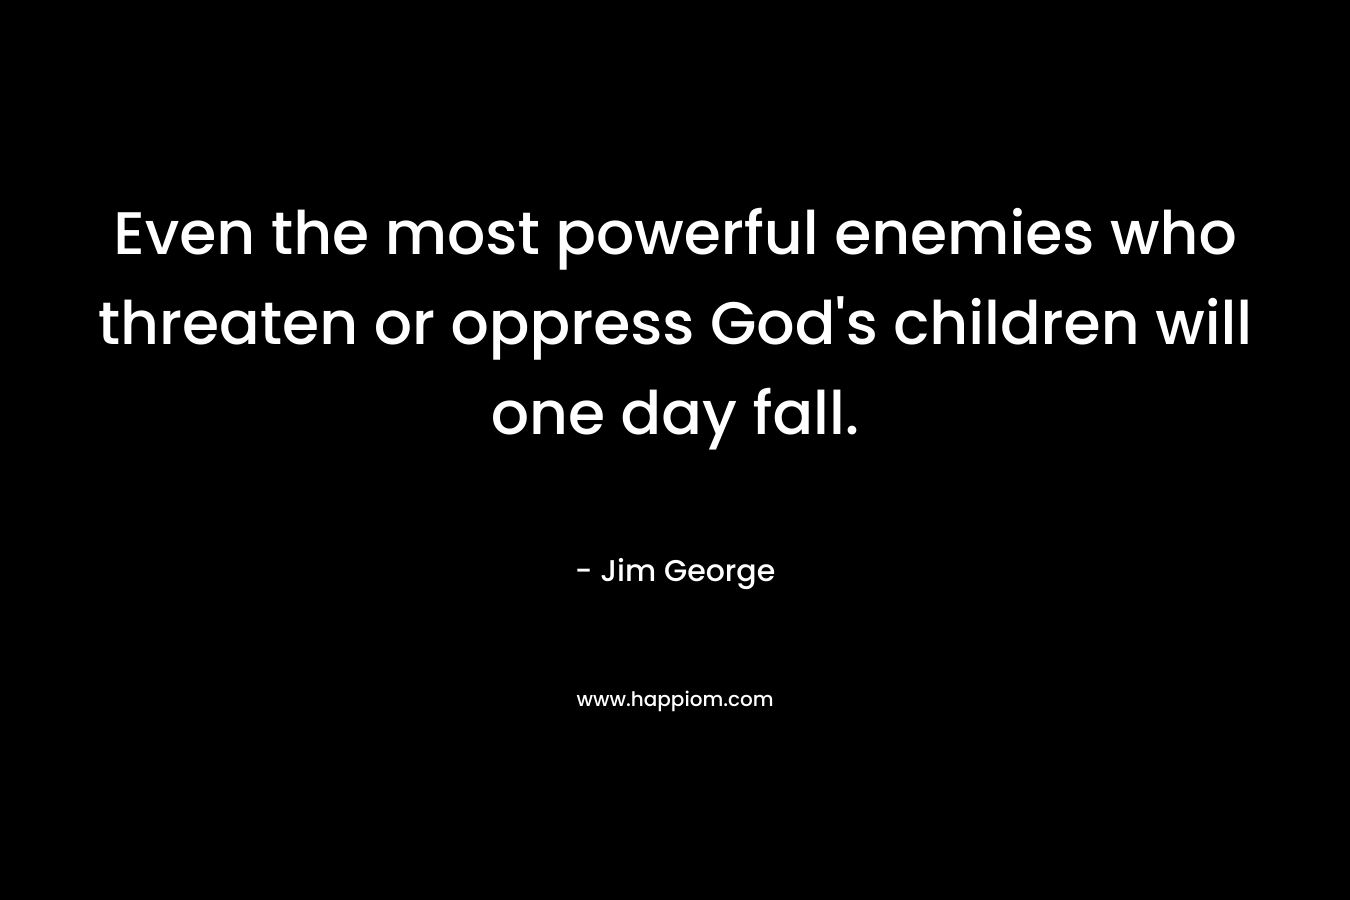 Even the most powerful enemies who threaten or oppress God's children will one day fall.